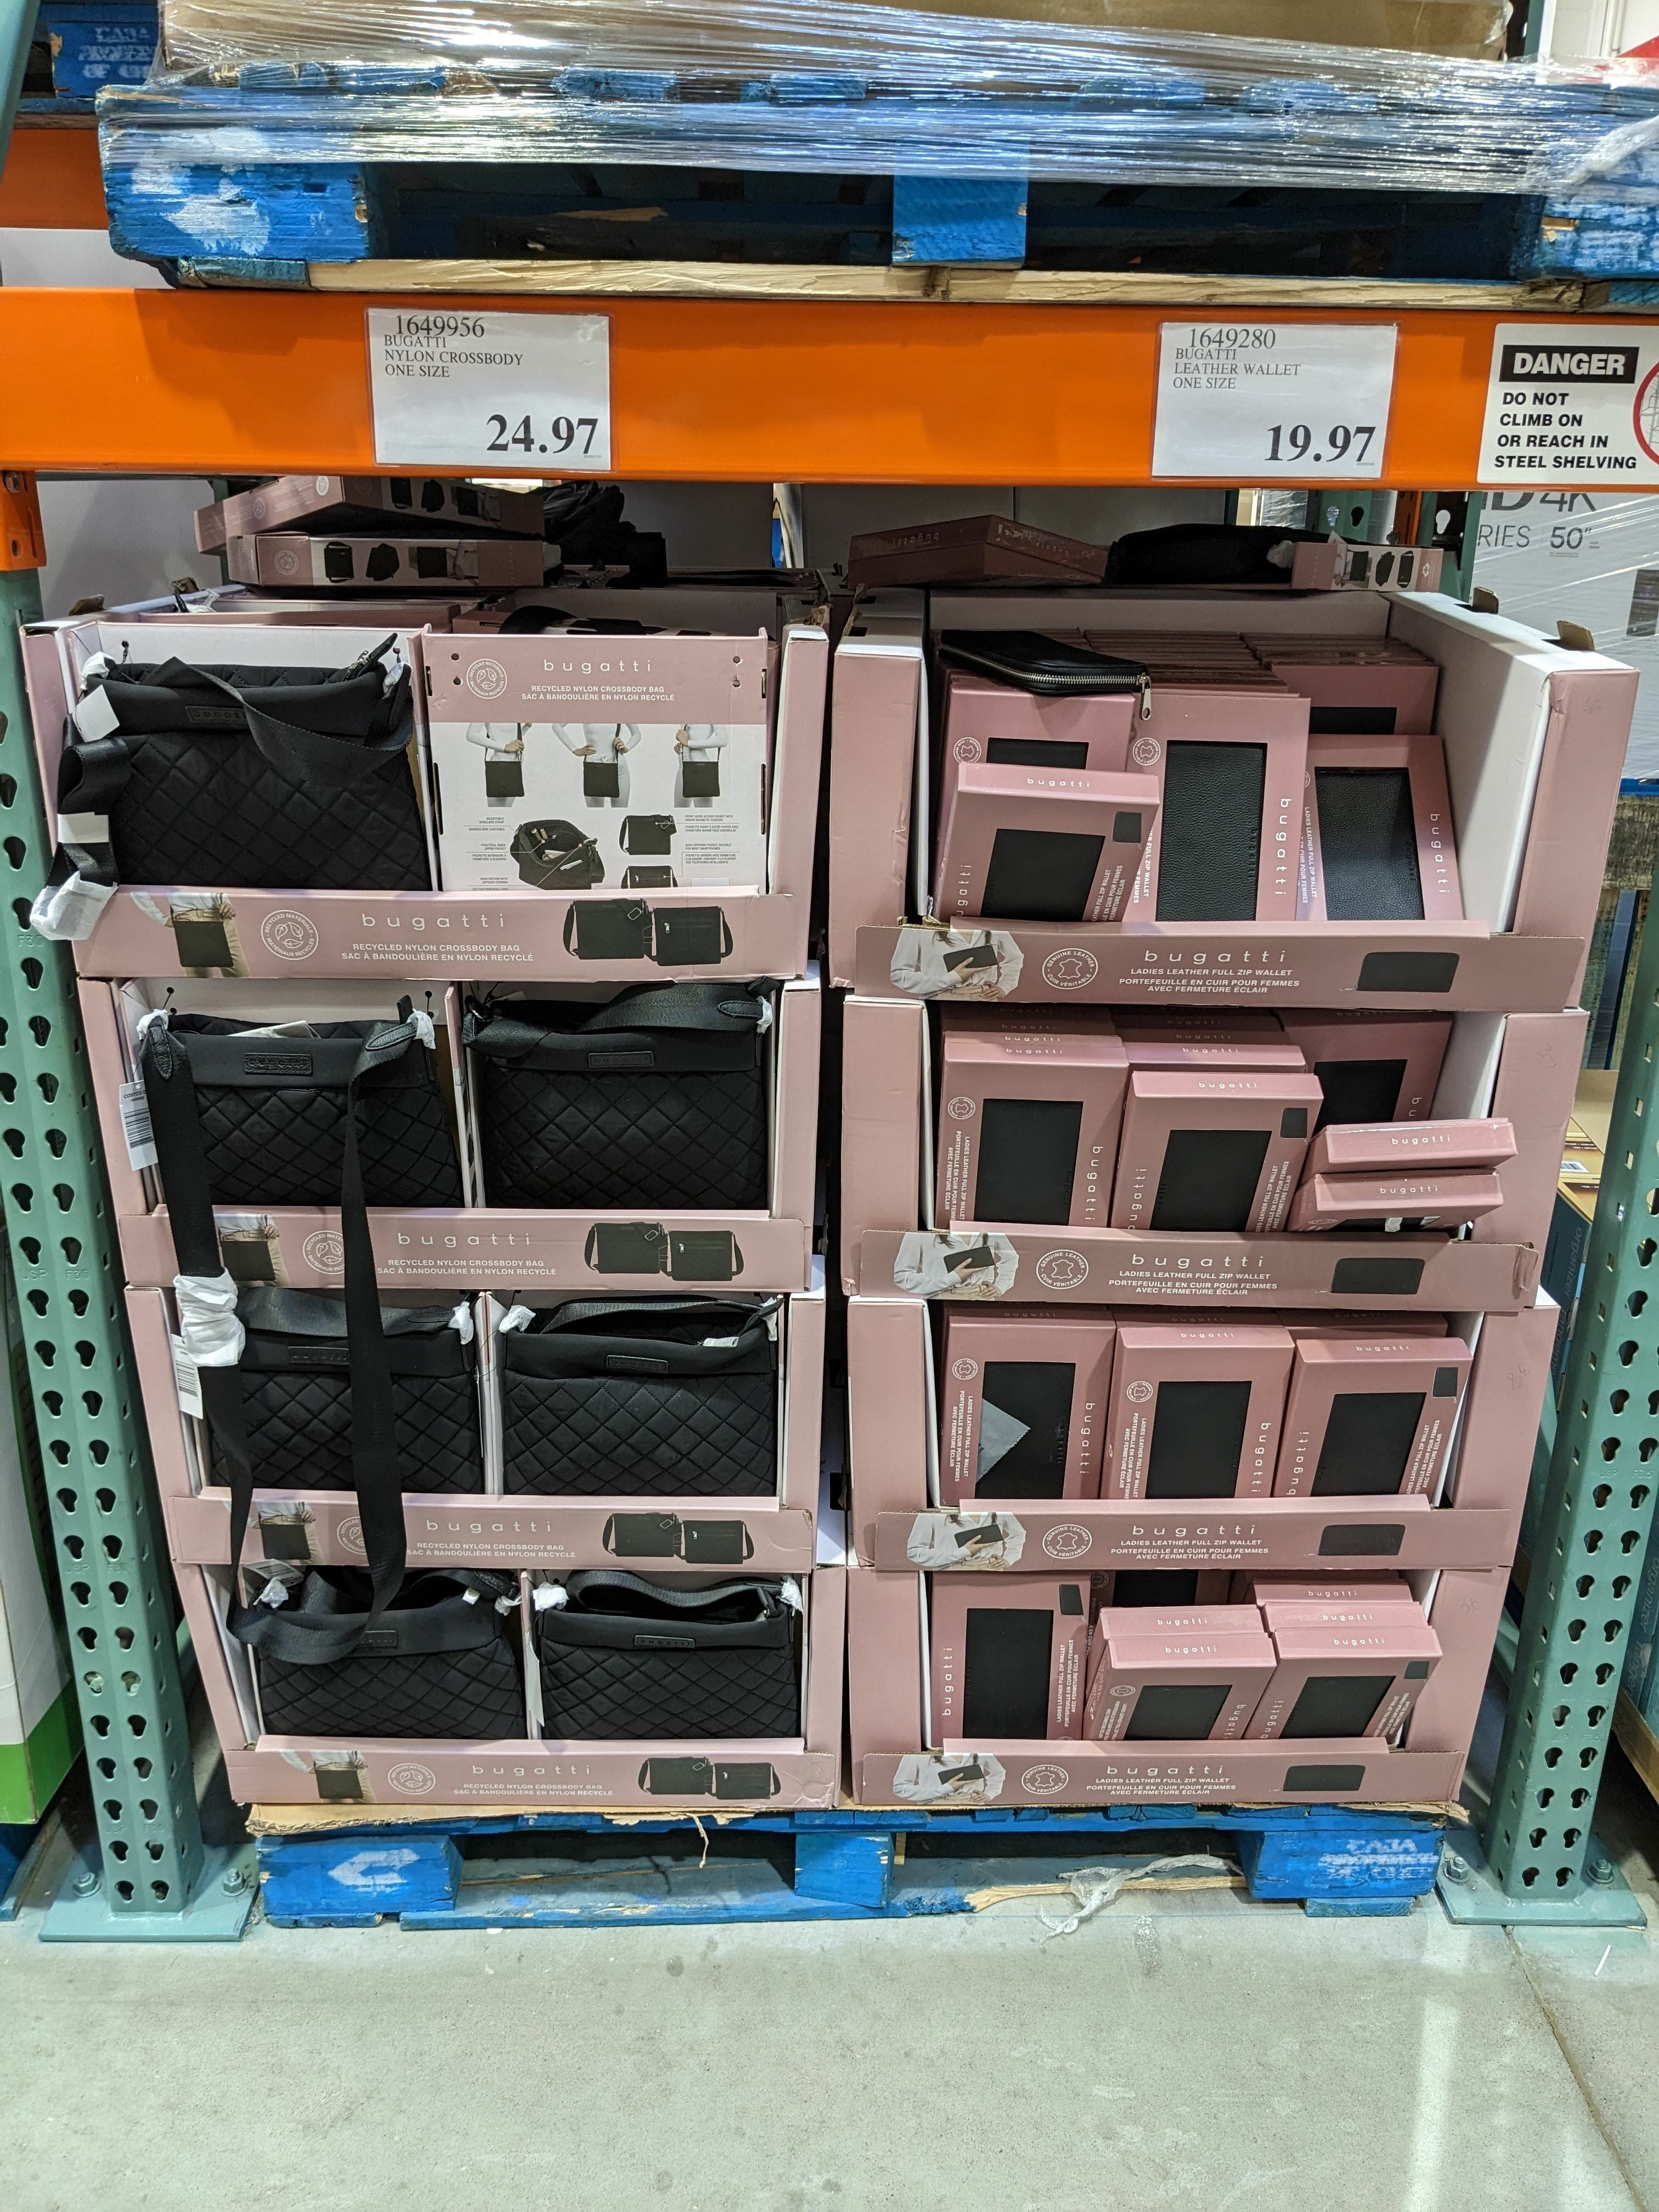 Costco Clearance for 71461, 60379, 71459, 21249 : r/legodeals